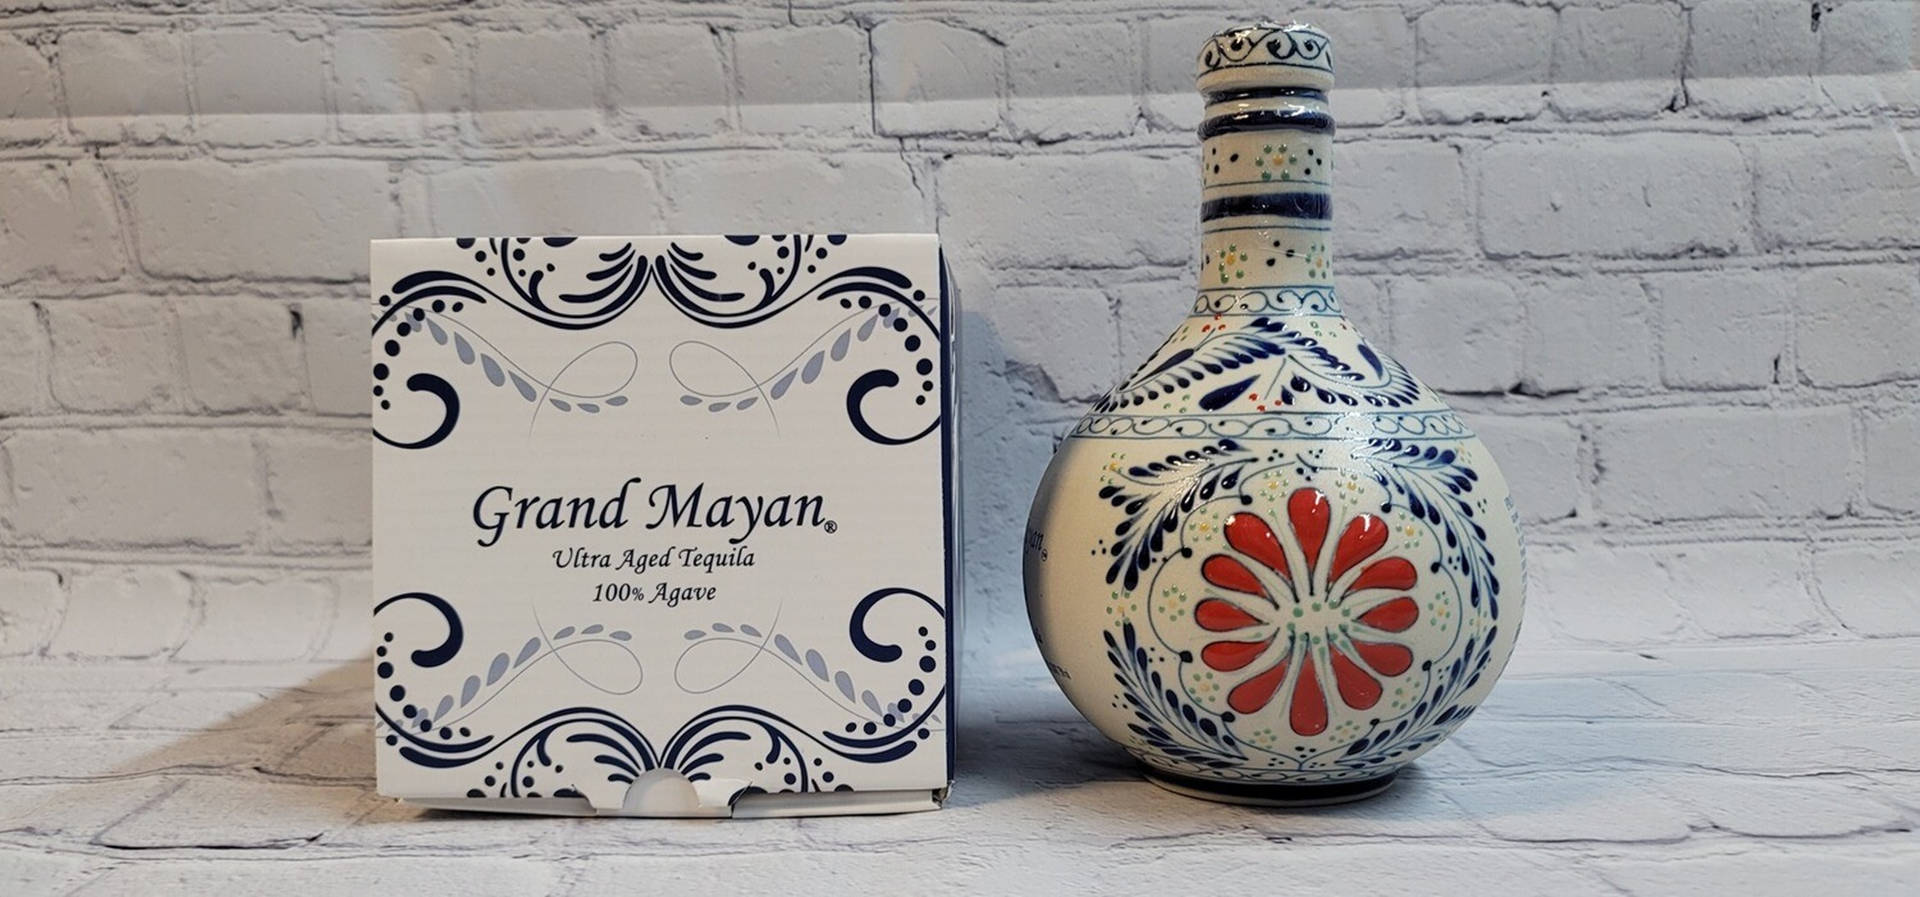 Grand Mayan Silver Tequila Ultra Aged Box Photography Picture